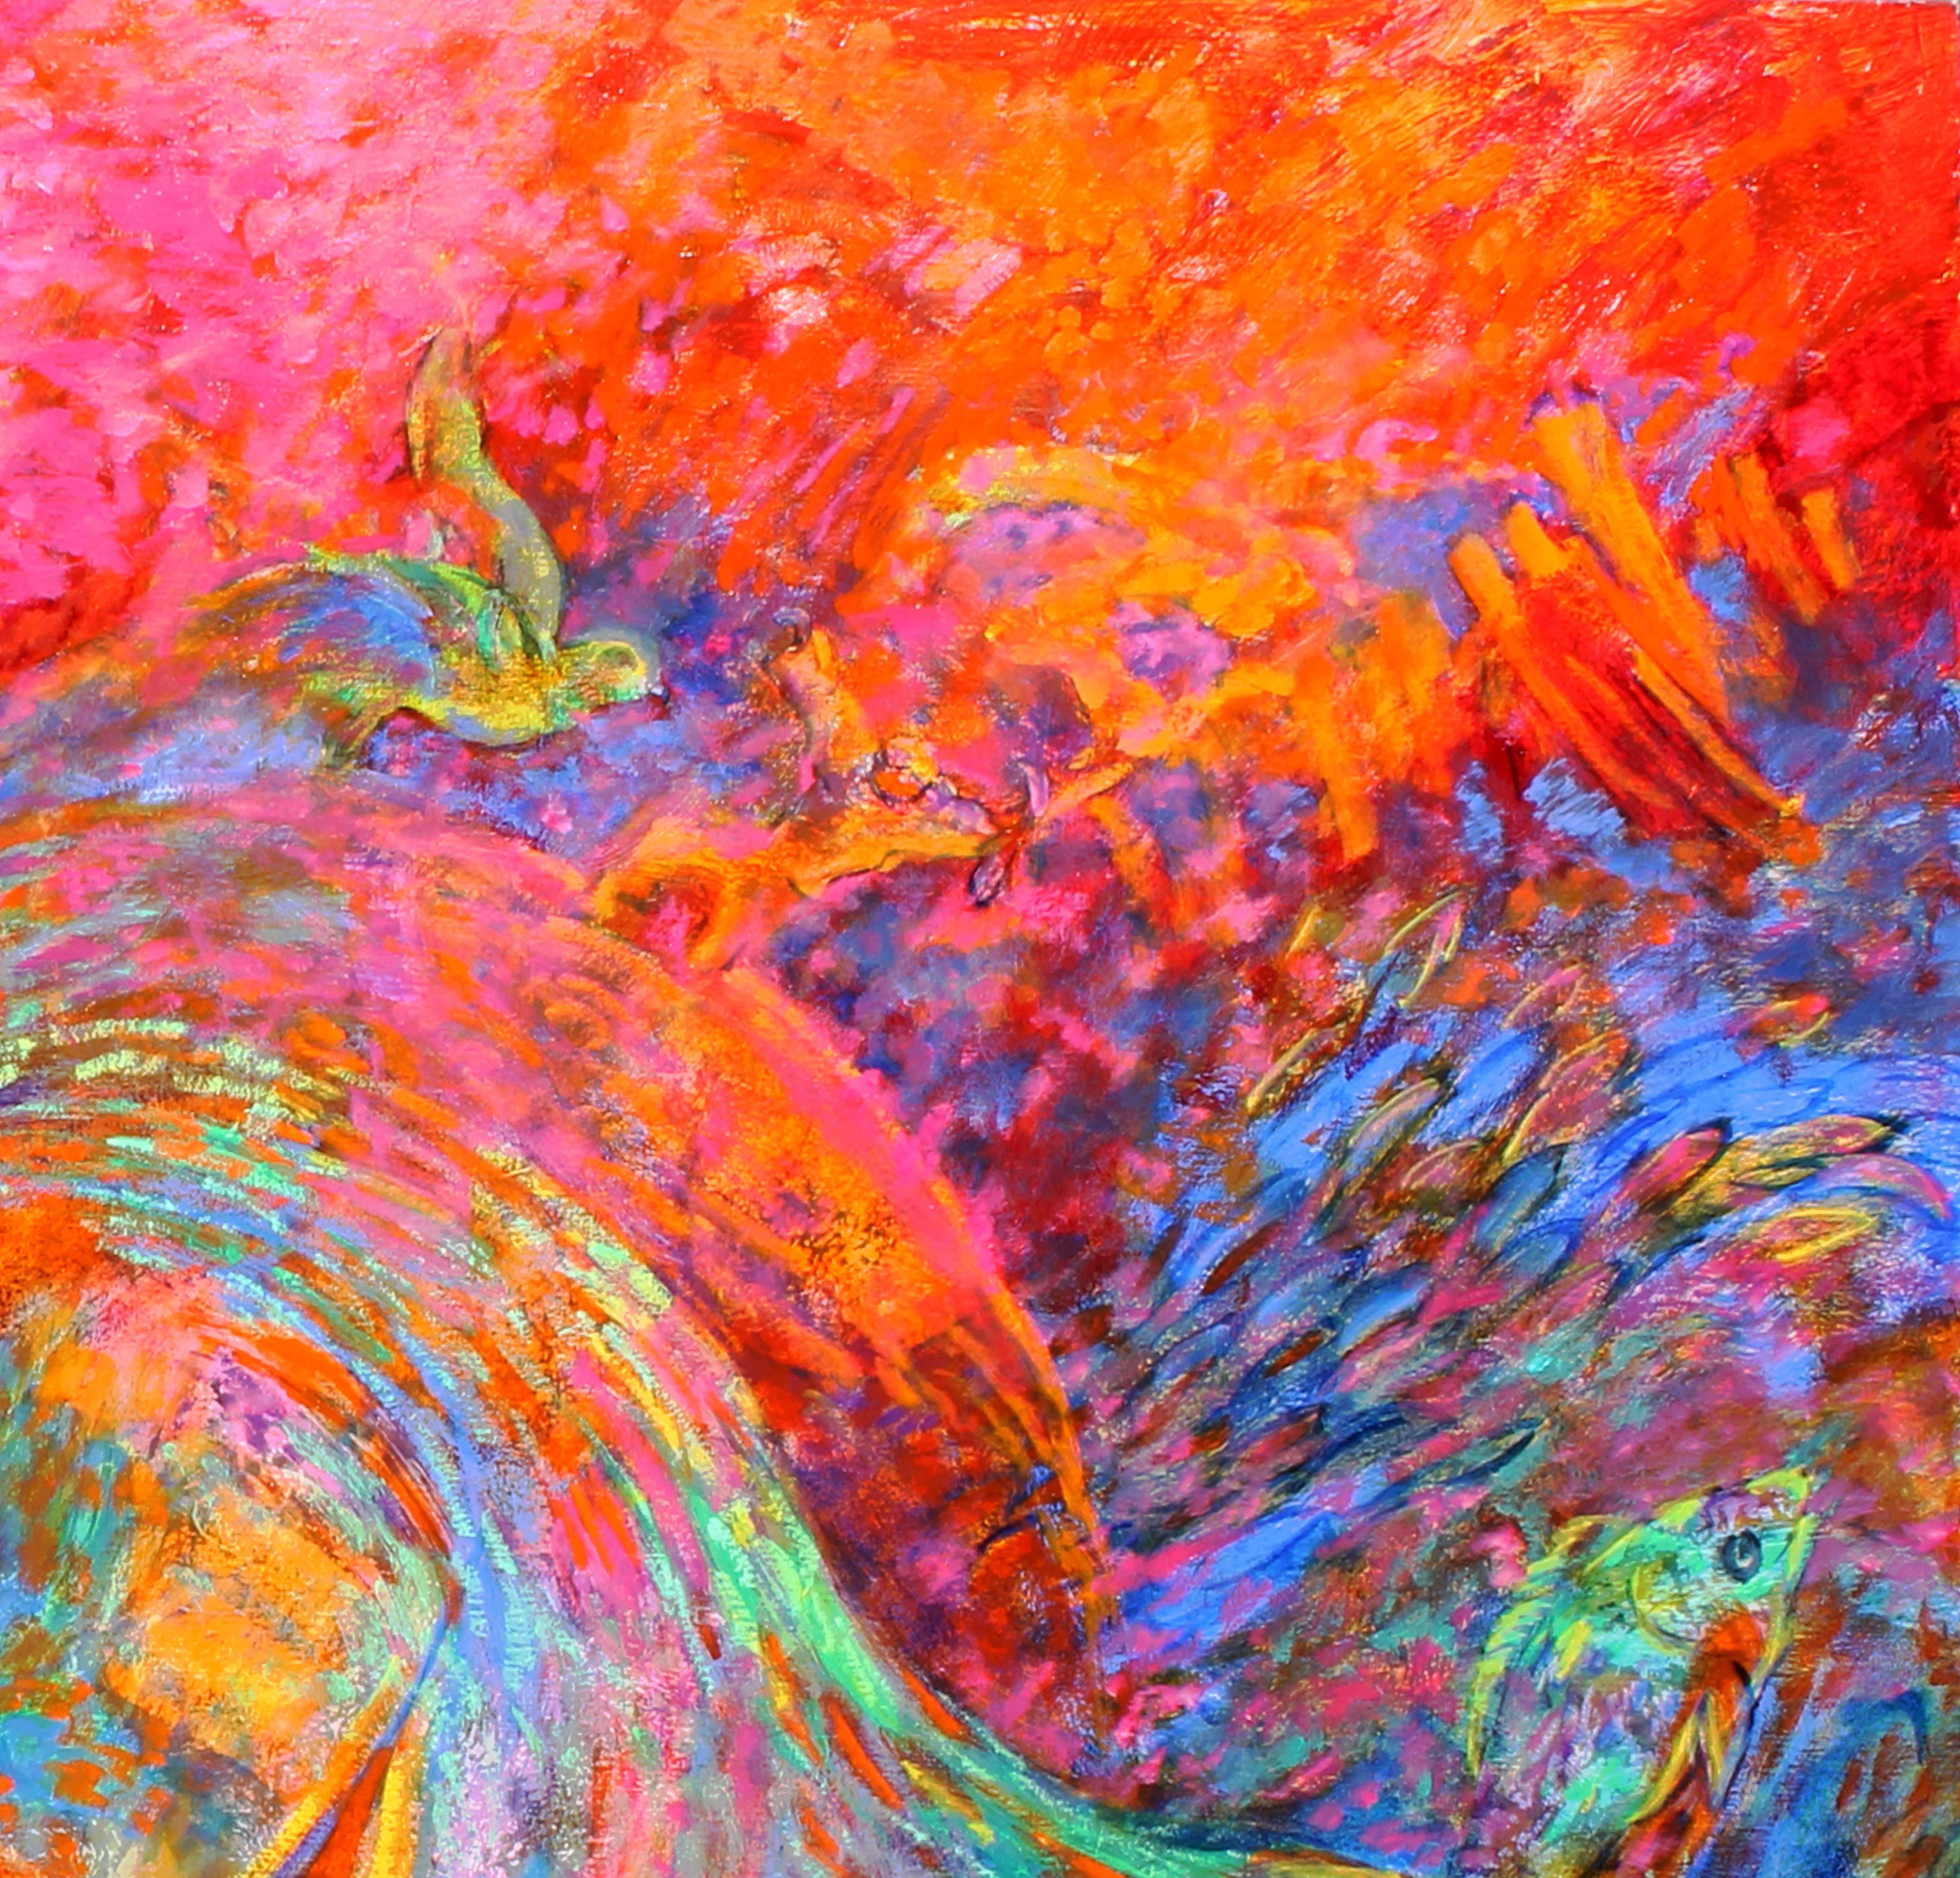 Magic World is a abstract painting made by Evelyne Ballestra, a French contemporary painter. This colorful expressionist painting is the reflection of the way the artist see the world, as a swirling with buildings, sea and fishes,